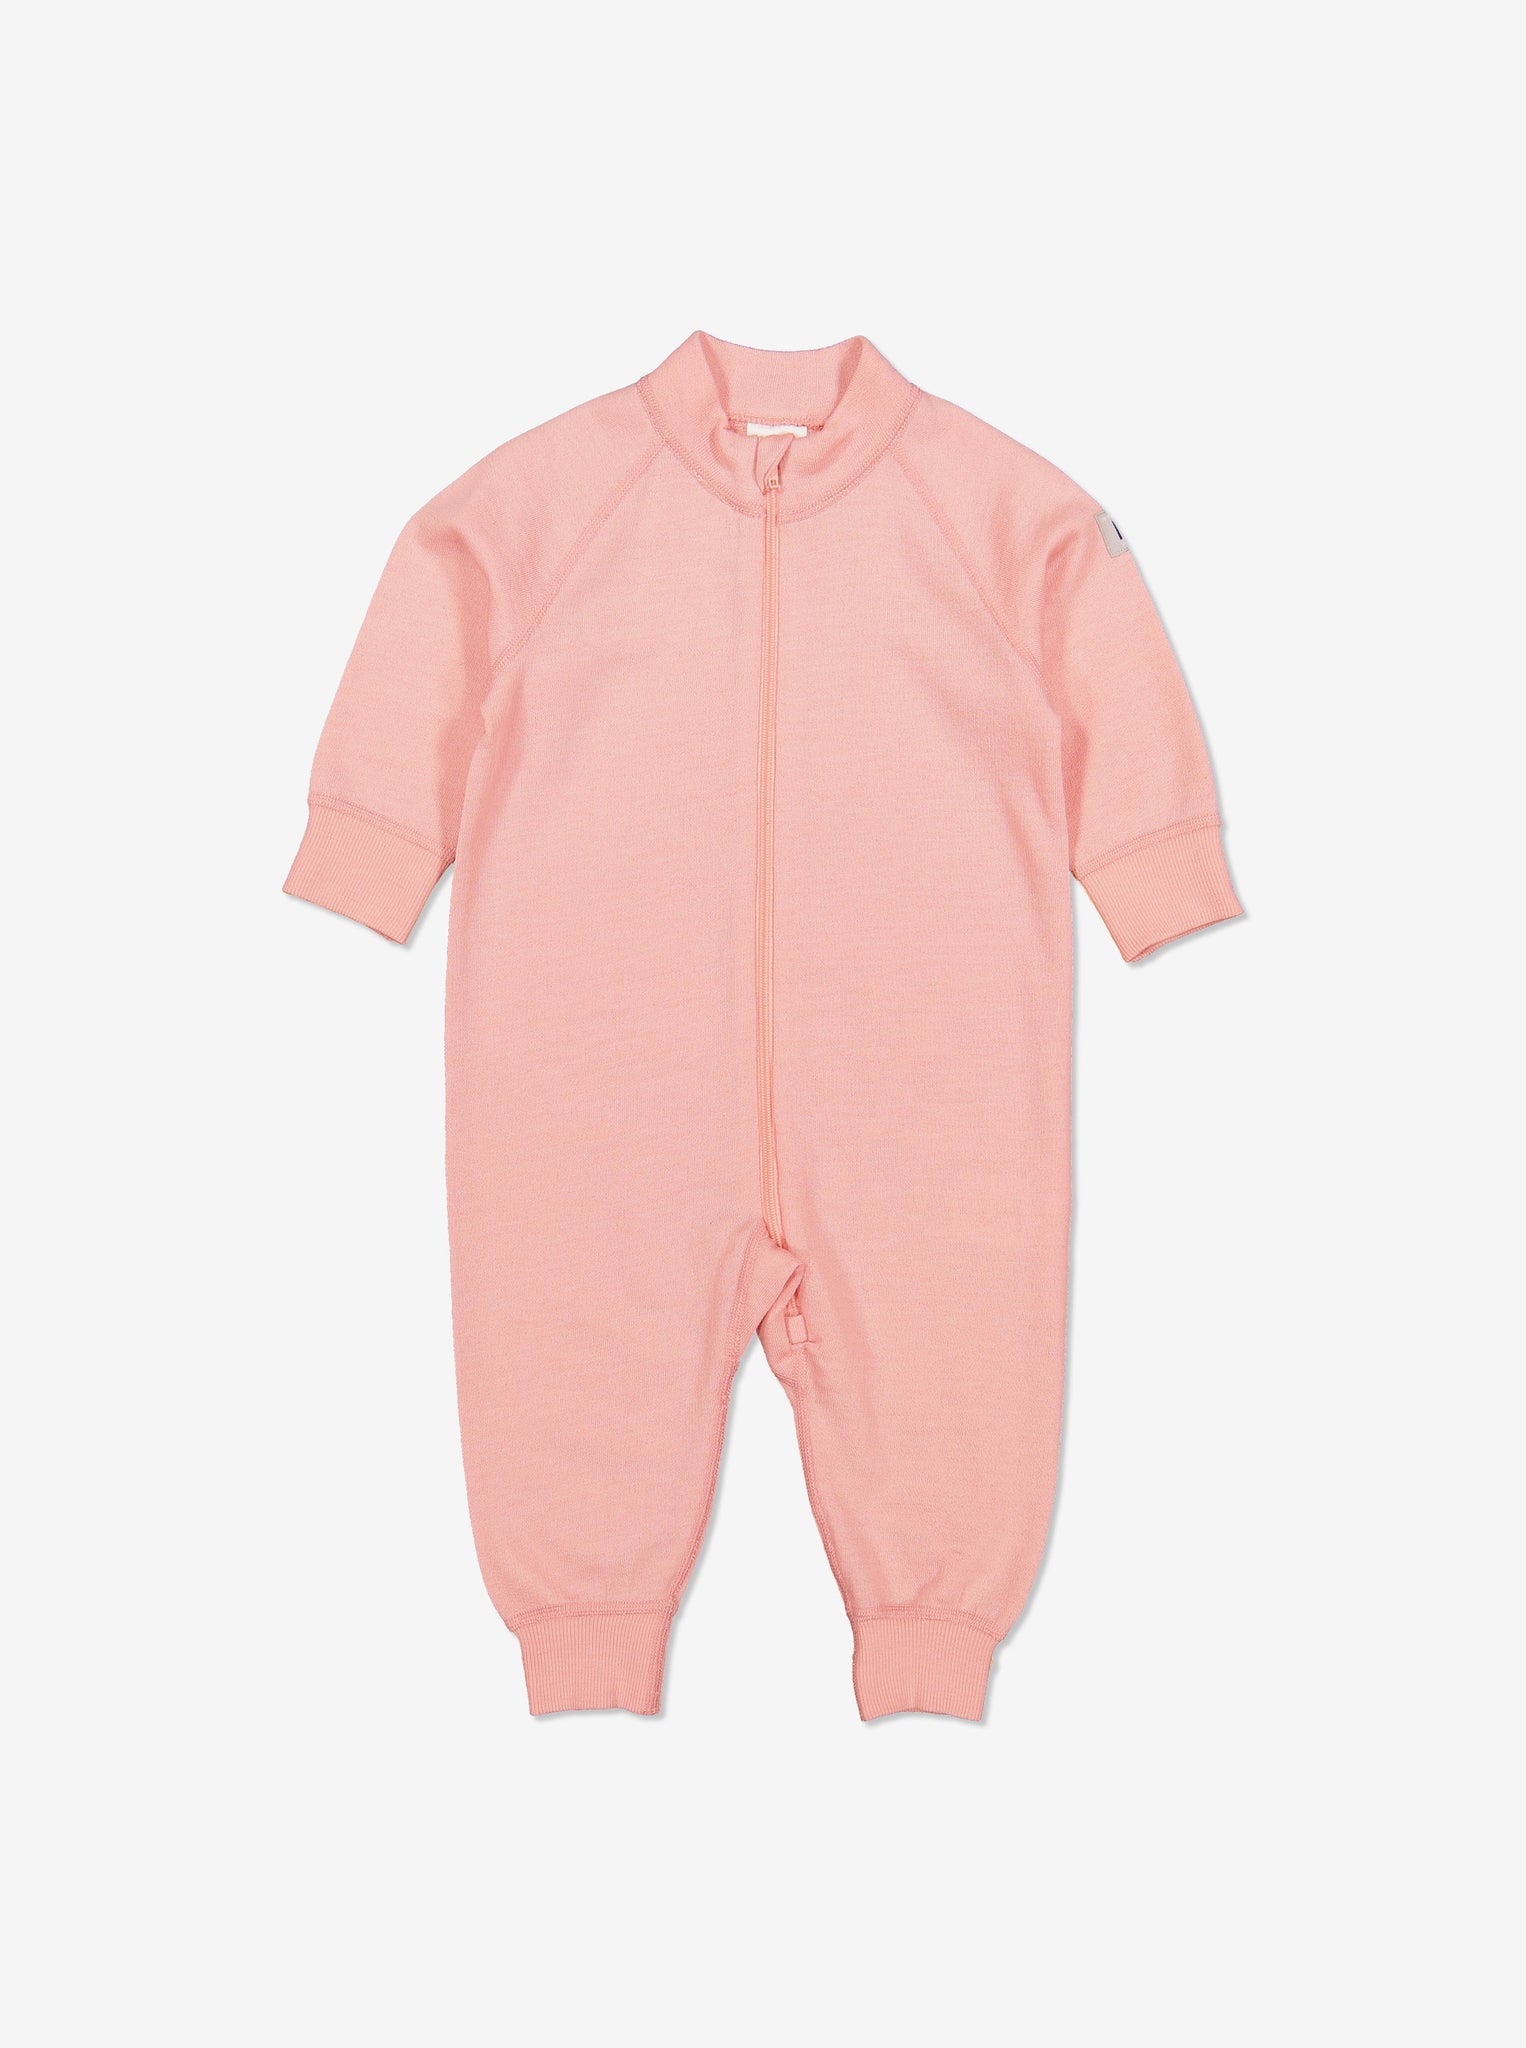 Thermal Merino All-In-One-1m-3y-Pink-Girl